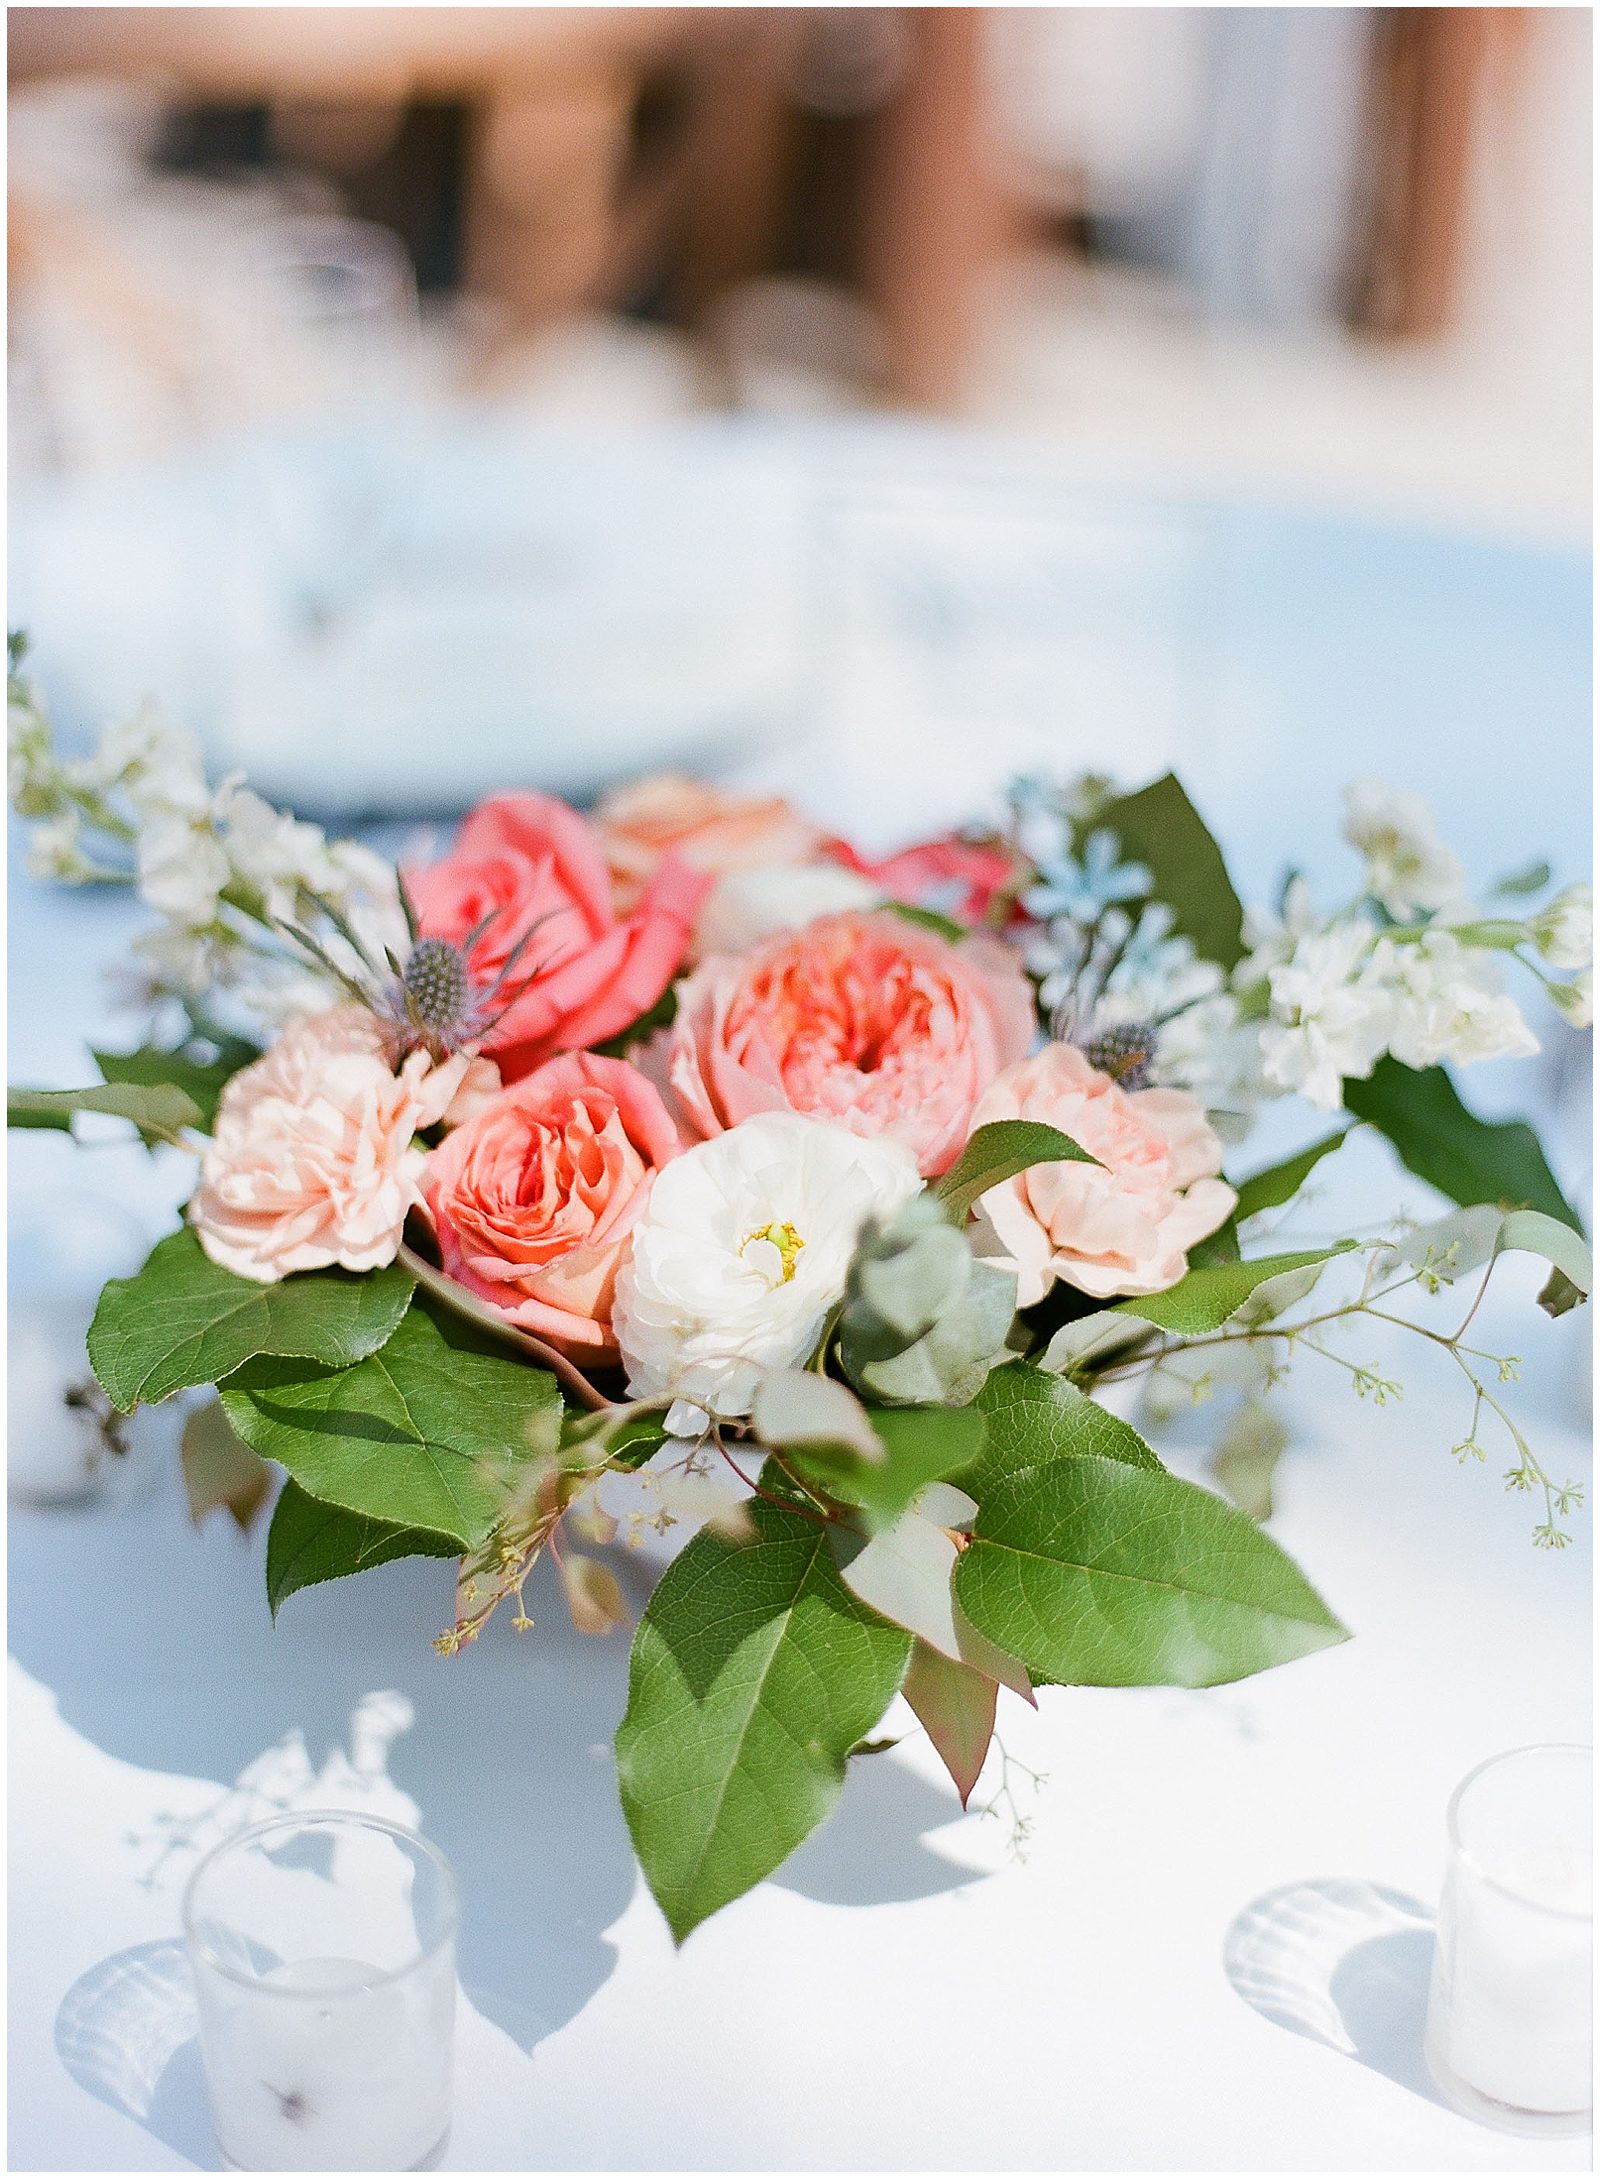 Wedding Colors For Summer Flowers on Reception table Photo